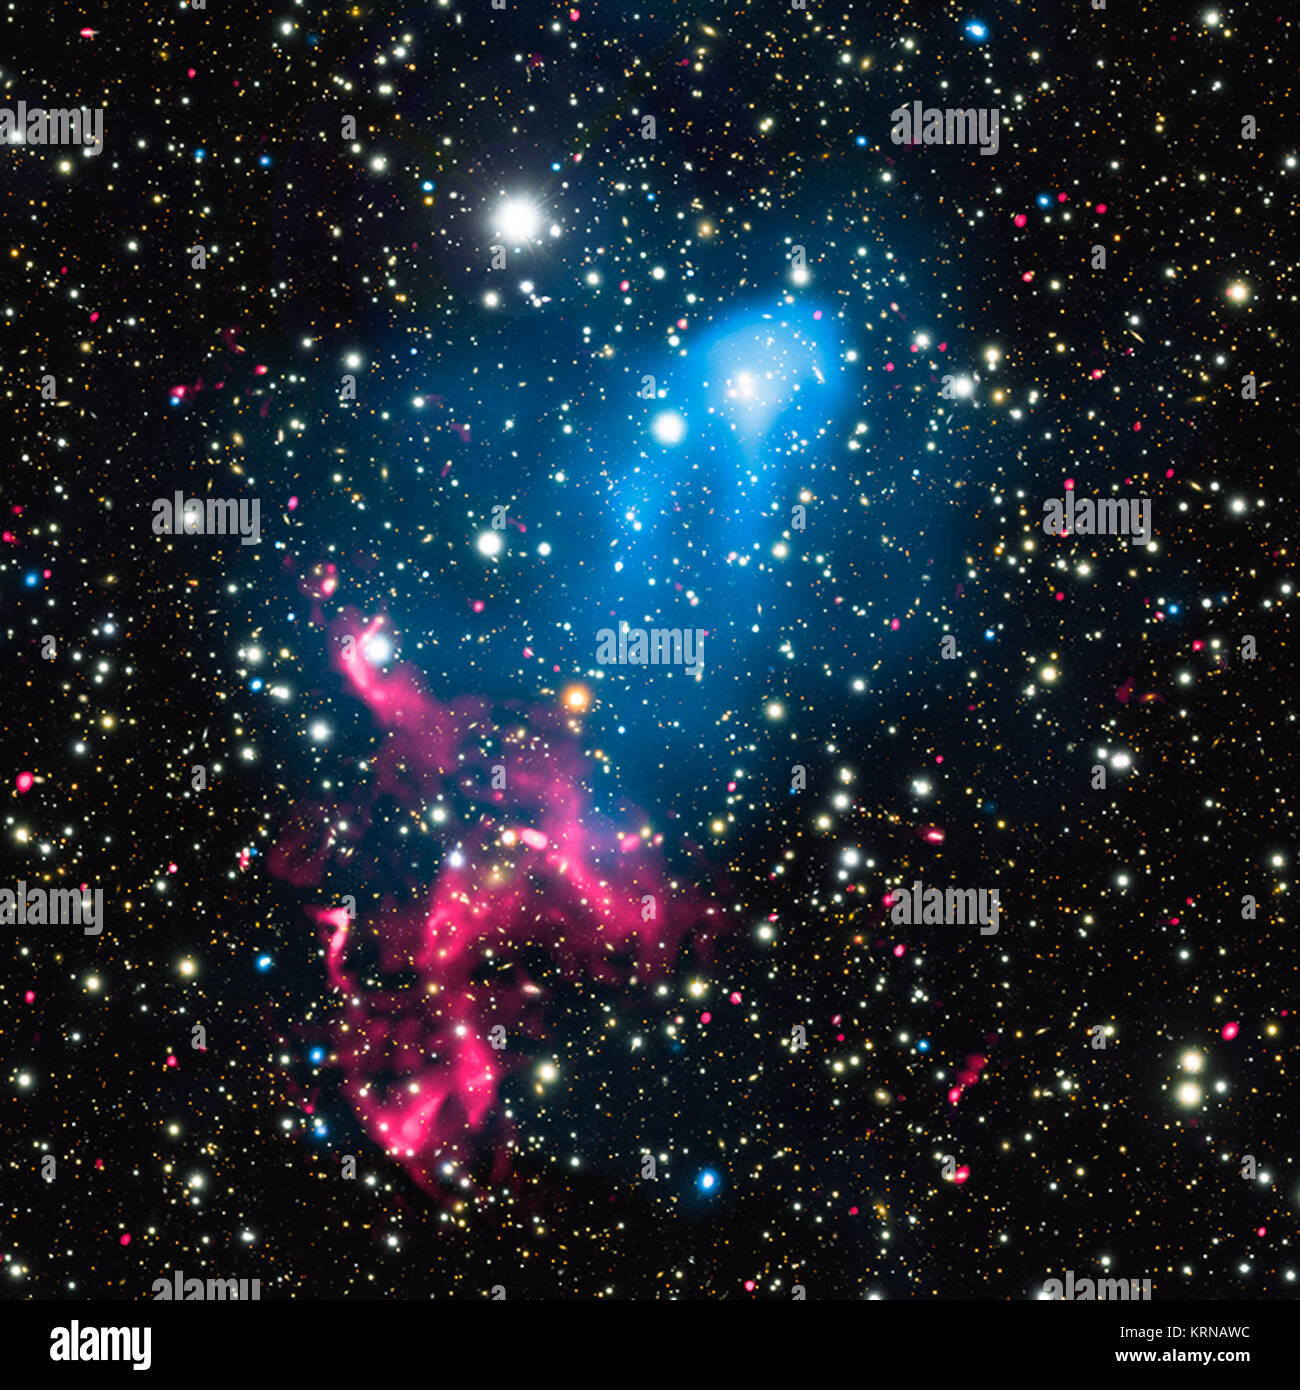 Astronomers have discovered what happens when the eruption from a supermassive black hole is swept up by the collision and merger of two galaxy clusters. This composite image contains X-rays from Chandra (blue), radio emission from the GMRT (red), and optical data from Subaru (red, green, and blue) of the colliding galaxy clusters called Abell 3411 and Abell 3412. These and other telescopes were used to analyze how the combination of these two powerful phenomena can create an extraordinary cosmic particle accelerator. A3411 Stock Photo